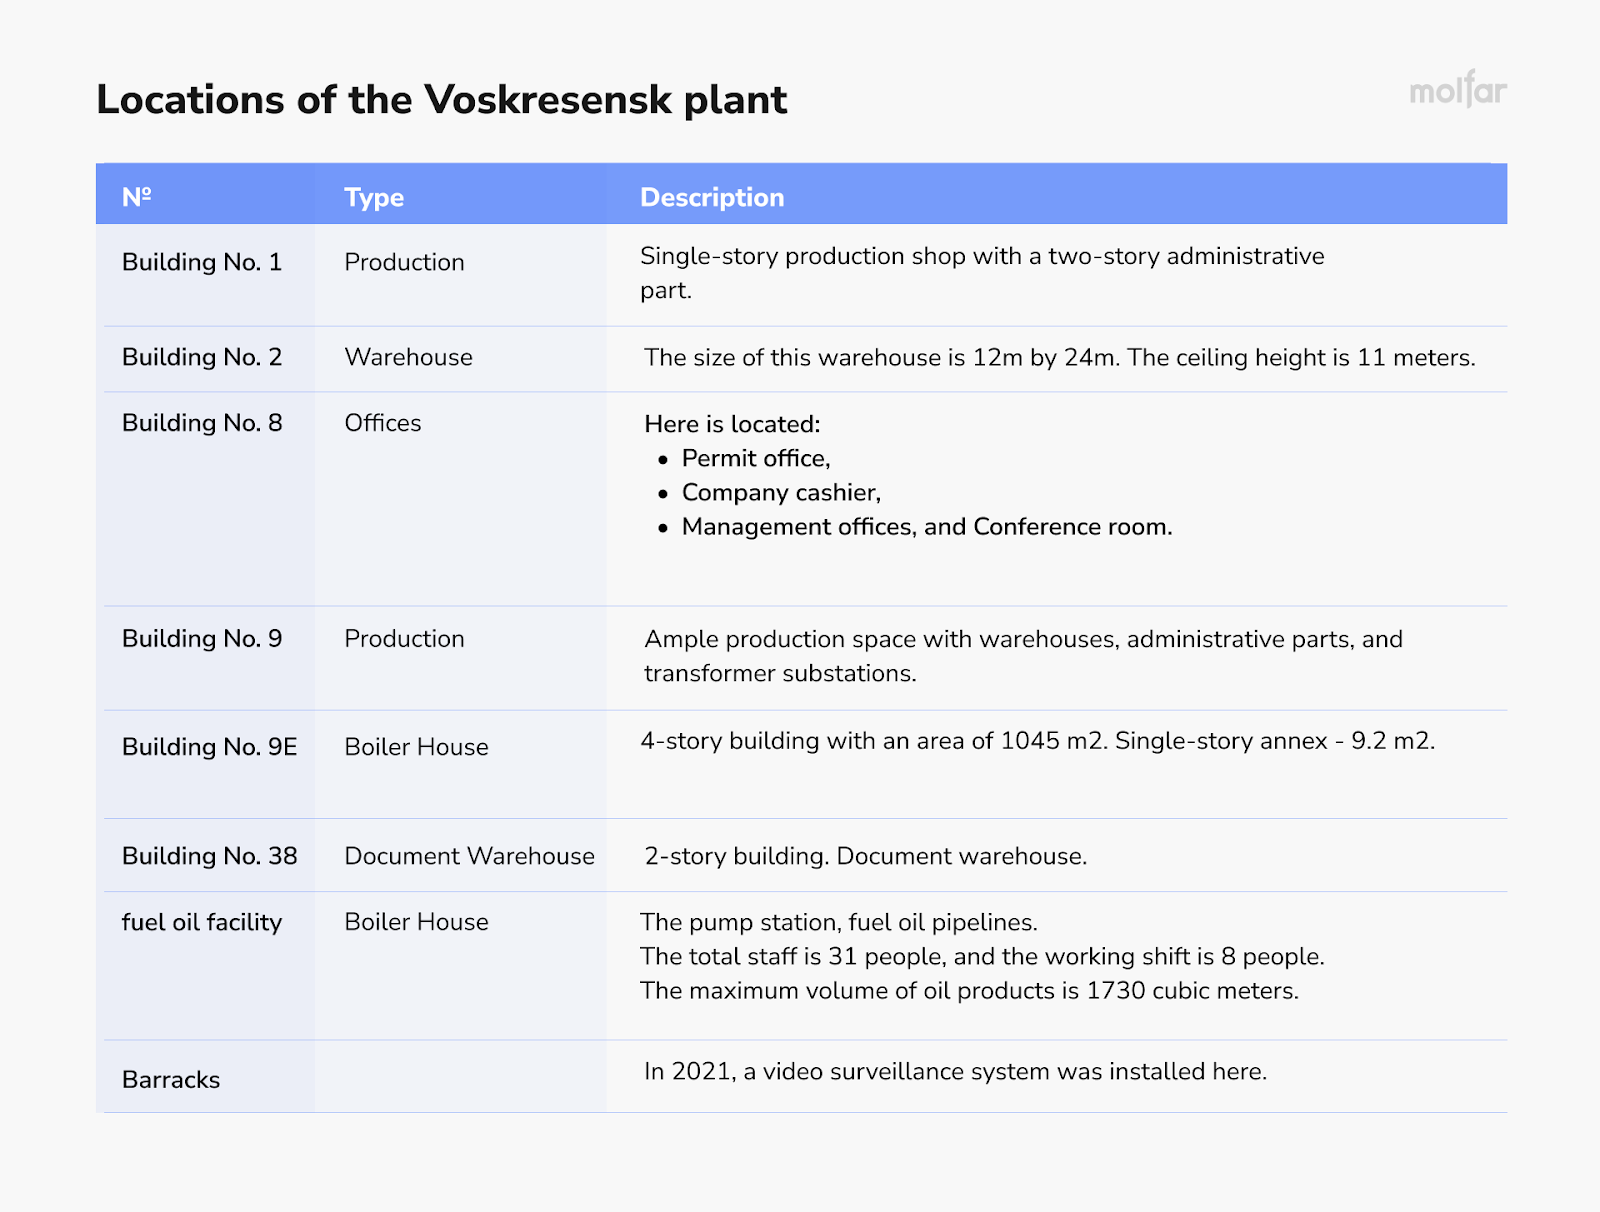 A list of some locations within the Voskresensk plant.